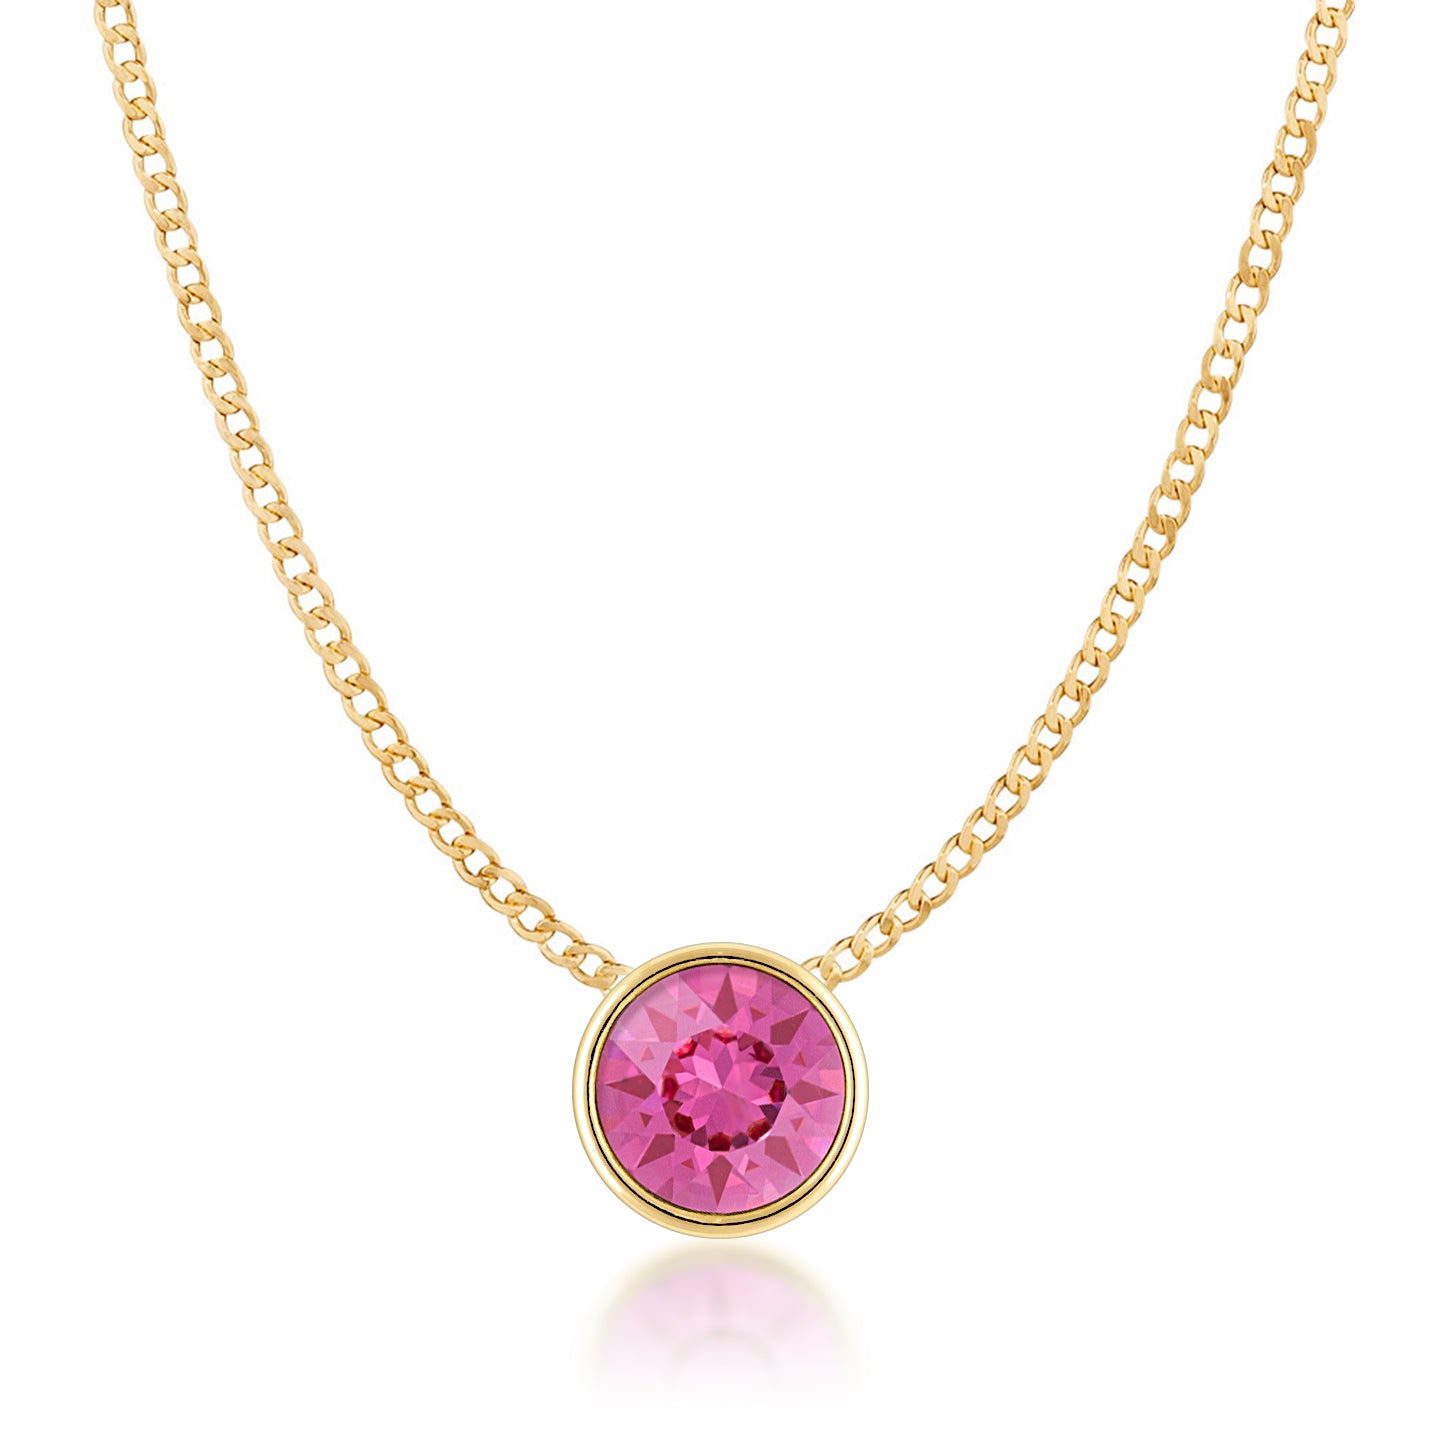 Harley Small Pendant Necklace with Pink Rose Round Crystals from Swarovski Gold Plated - Ed Heart